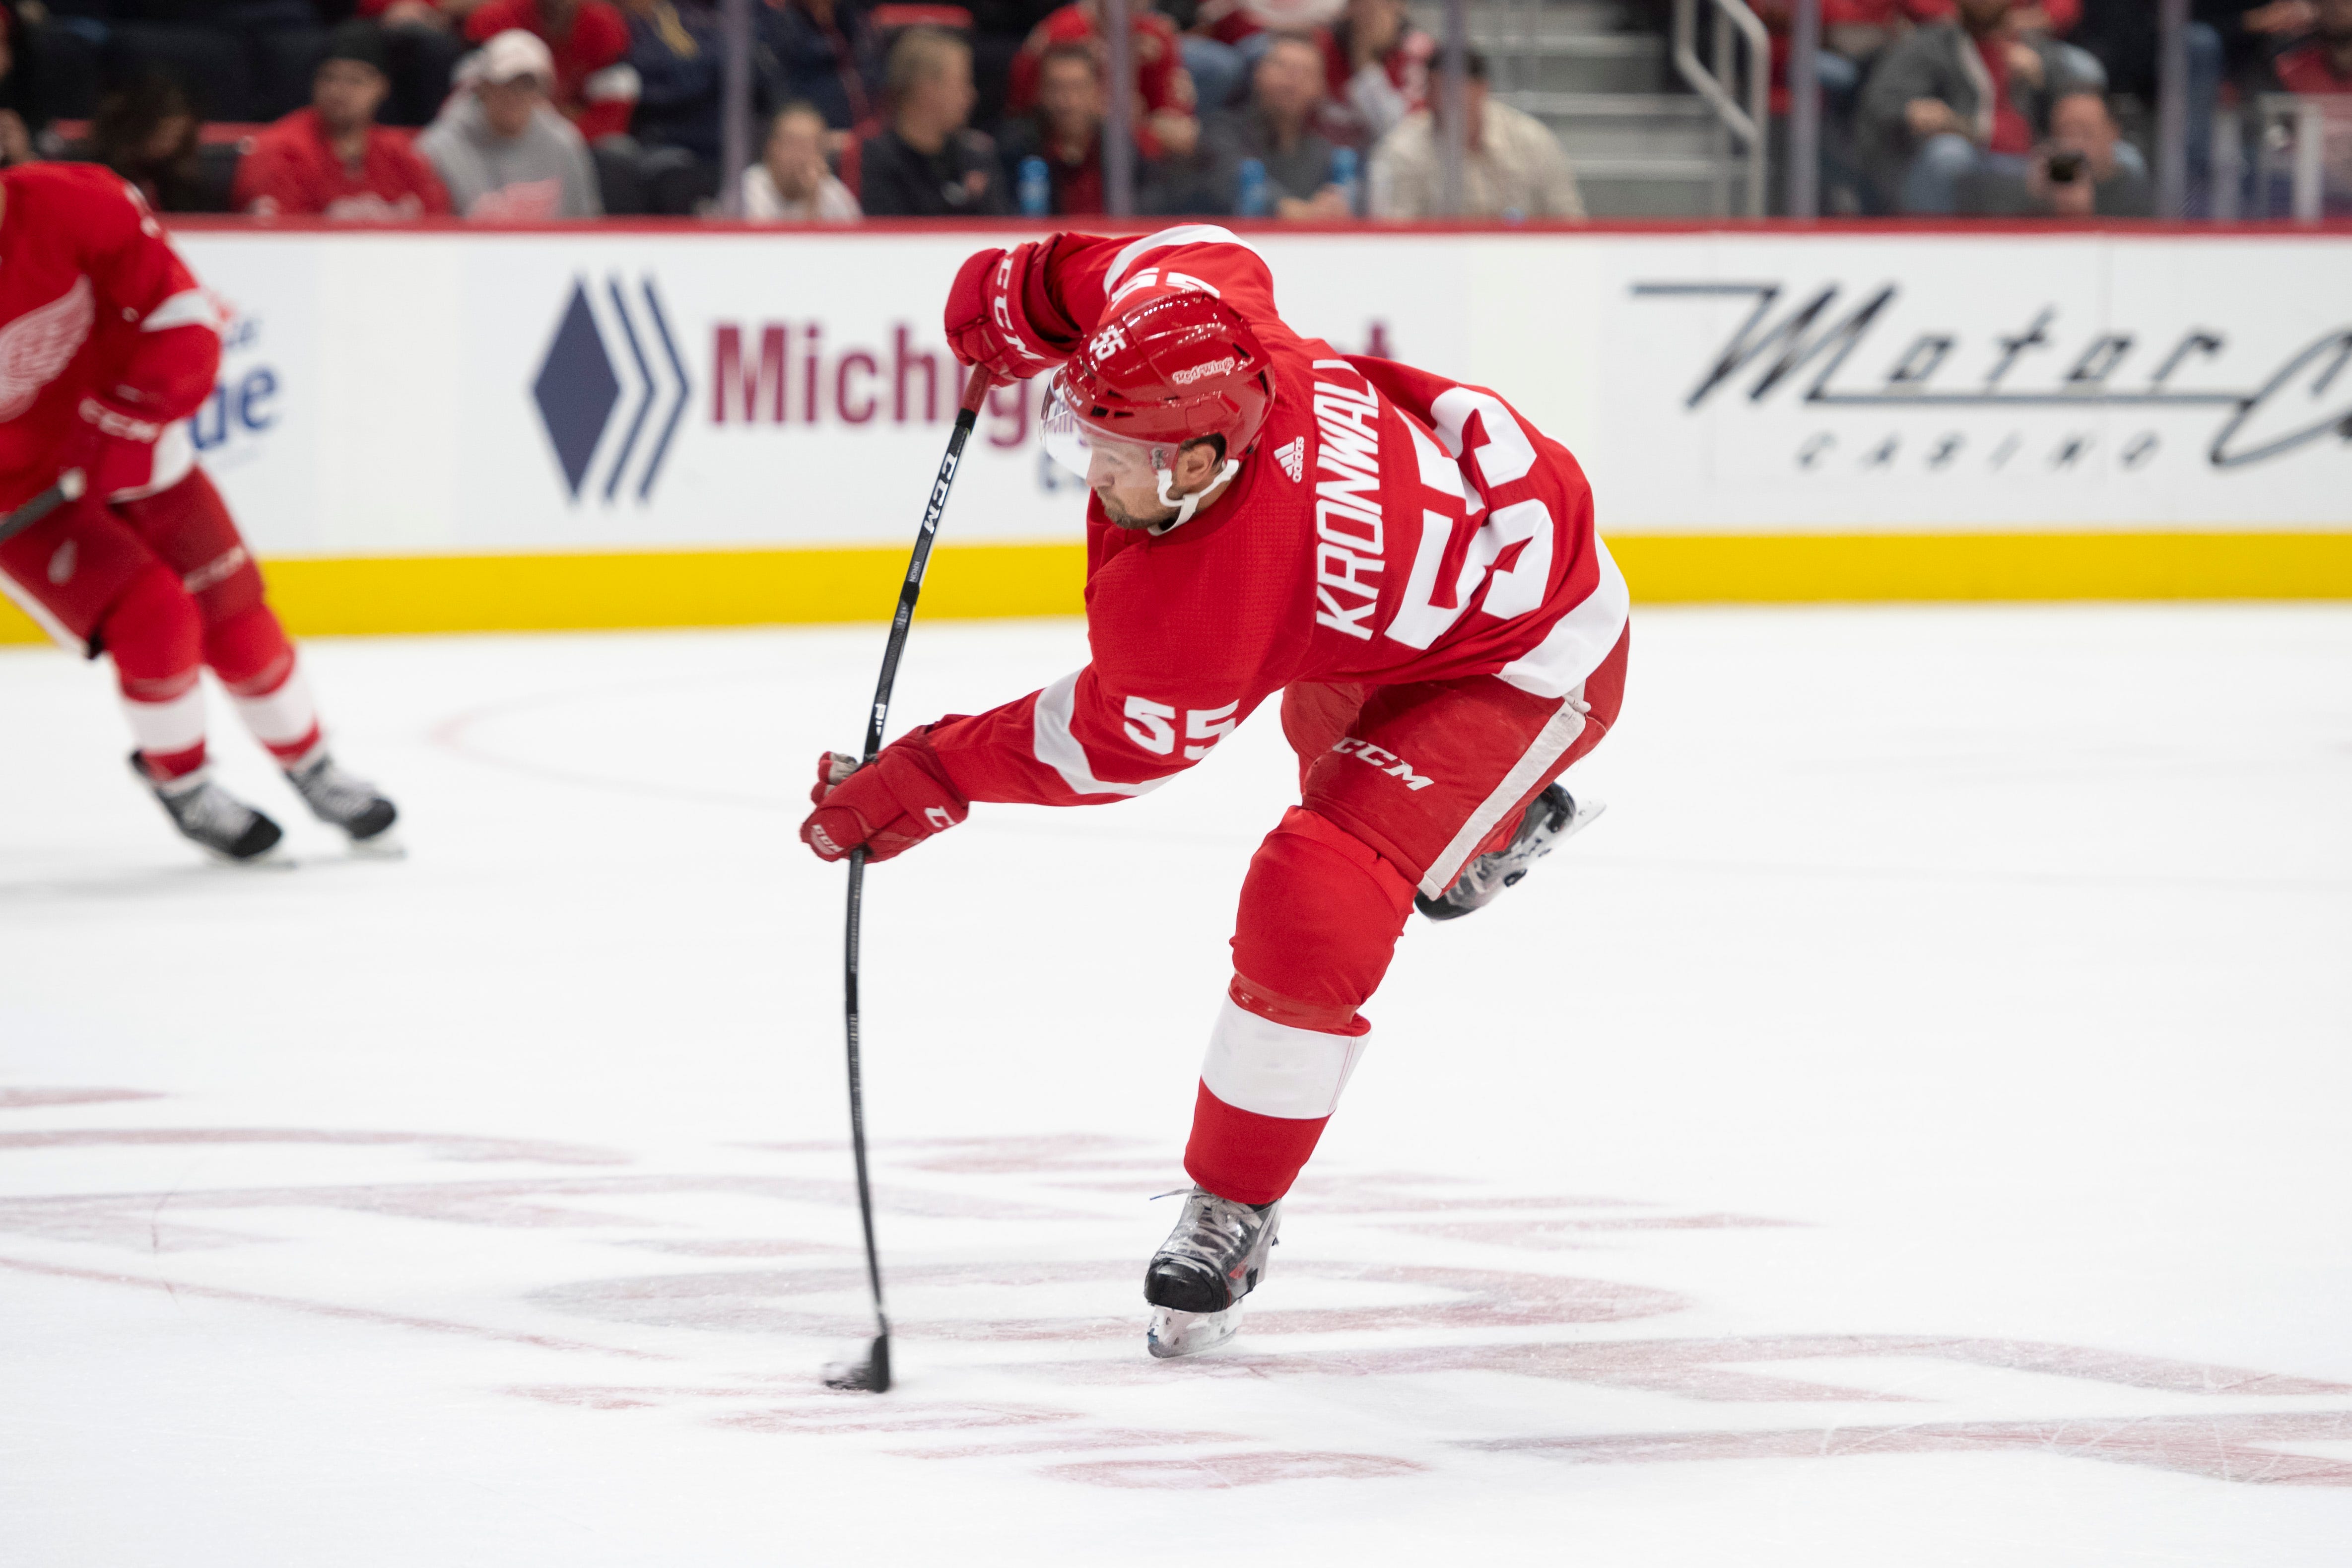 12. Niklas Kronwall, defenseman. An unrestricted free agent, Kronwall’s future in the organization is cloudy. He’s been a valuable contributor for 15 seasons, he’s a respected presence on and off the ice, and it wouldn’t be surprising to see the Wings ask Kronwall to return for another year.